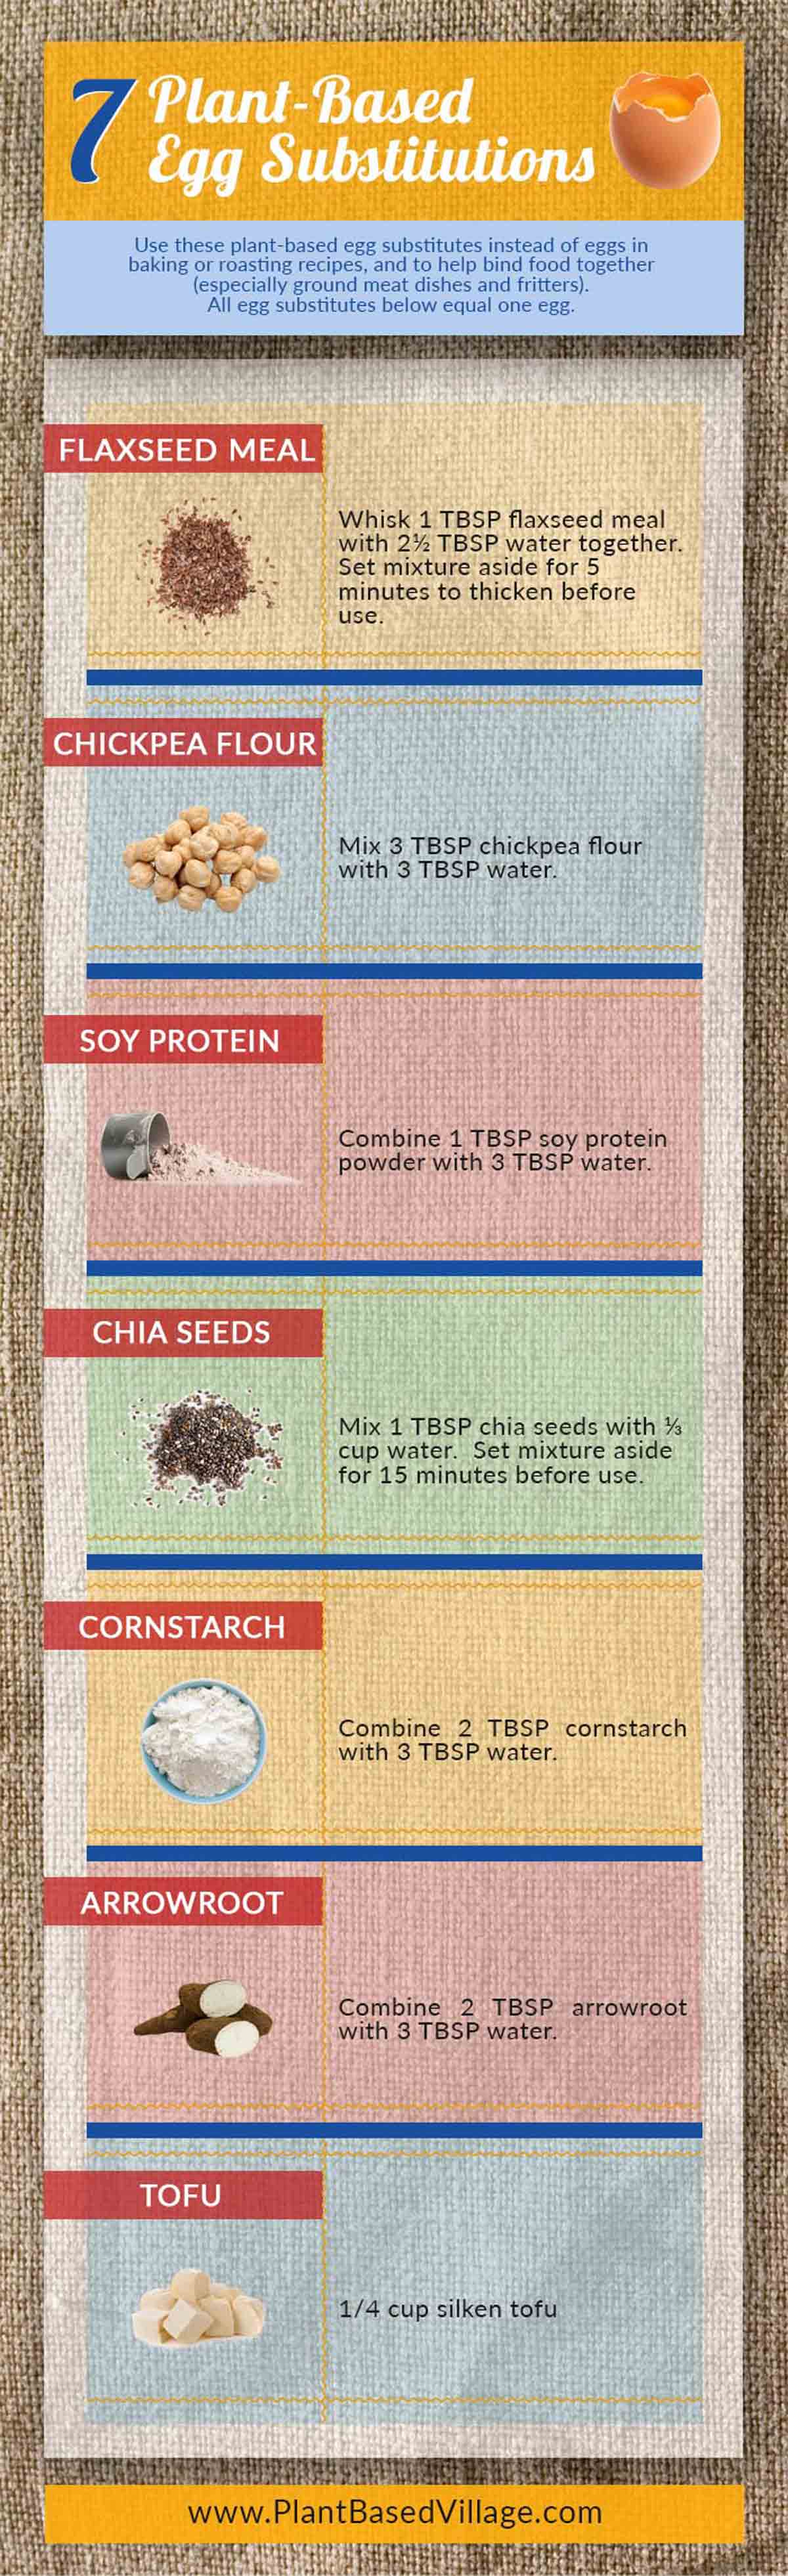 Infographic - 7 plant based egg substitutions